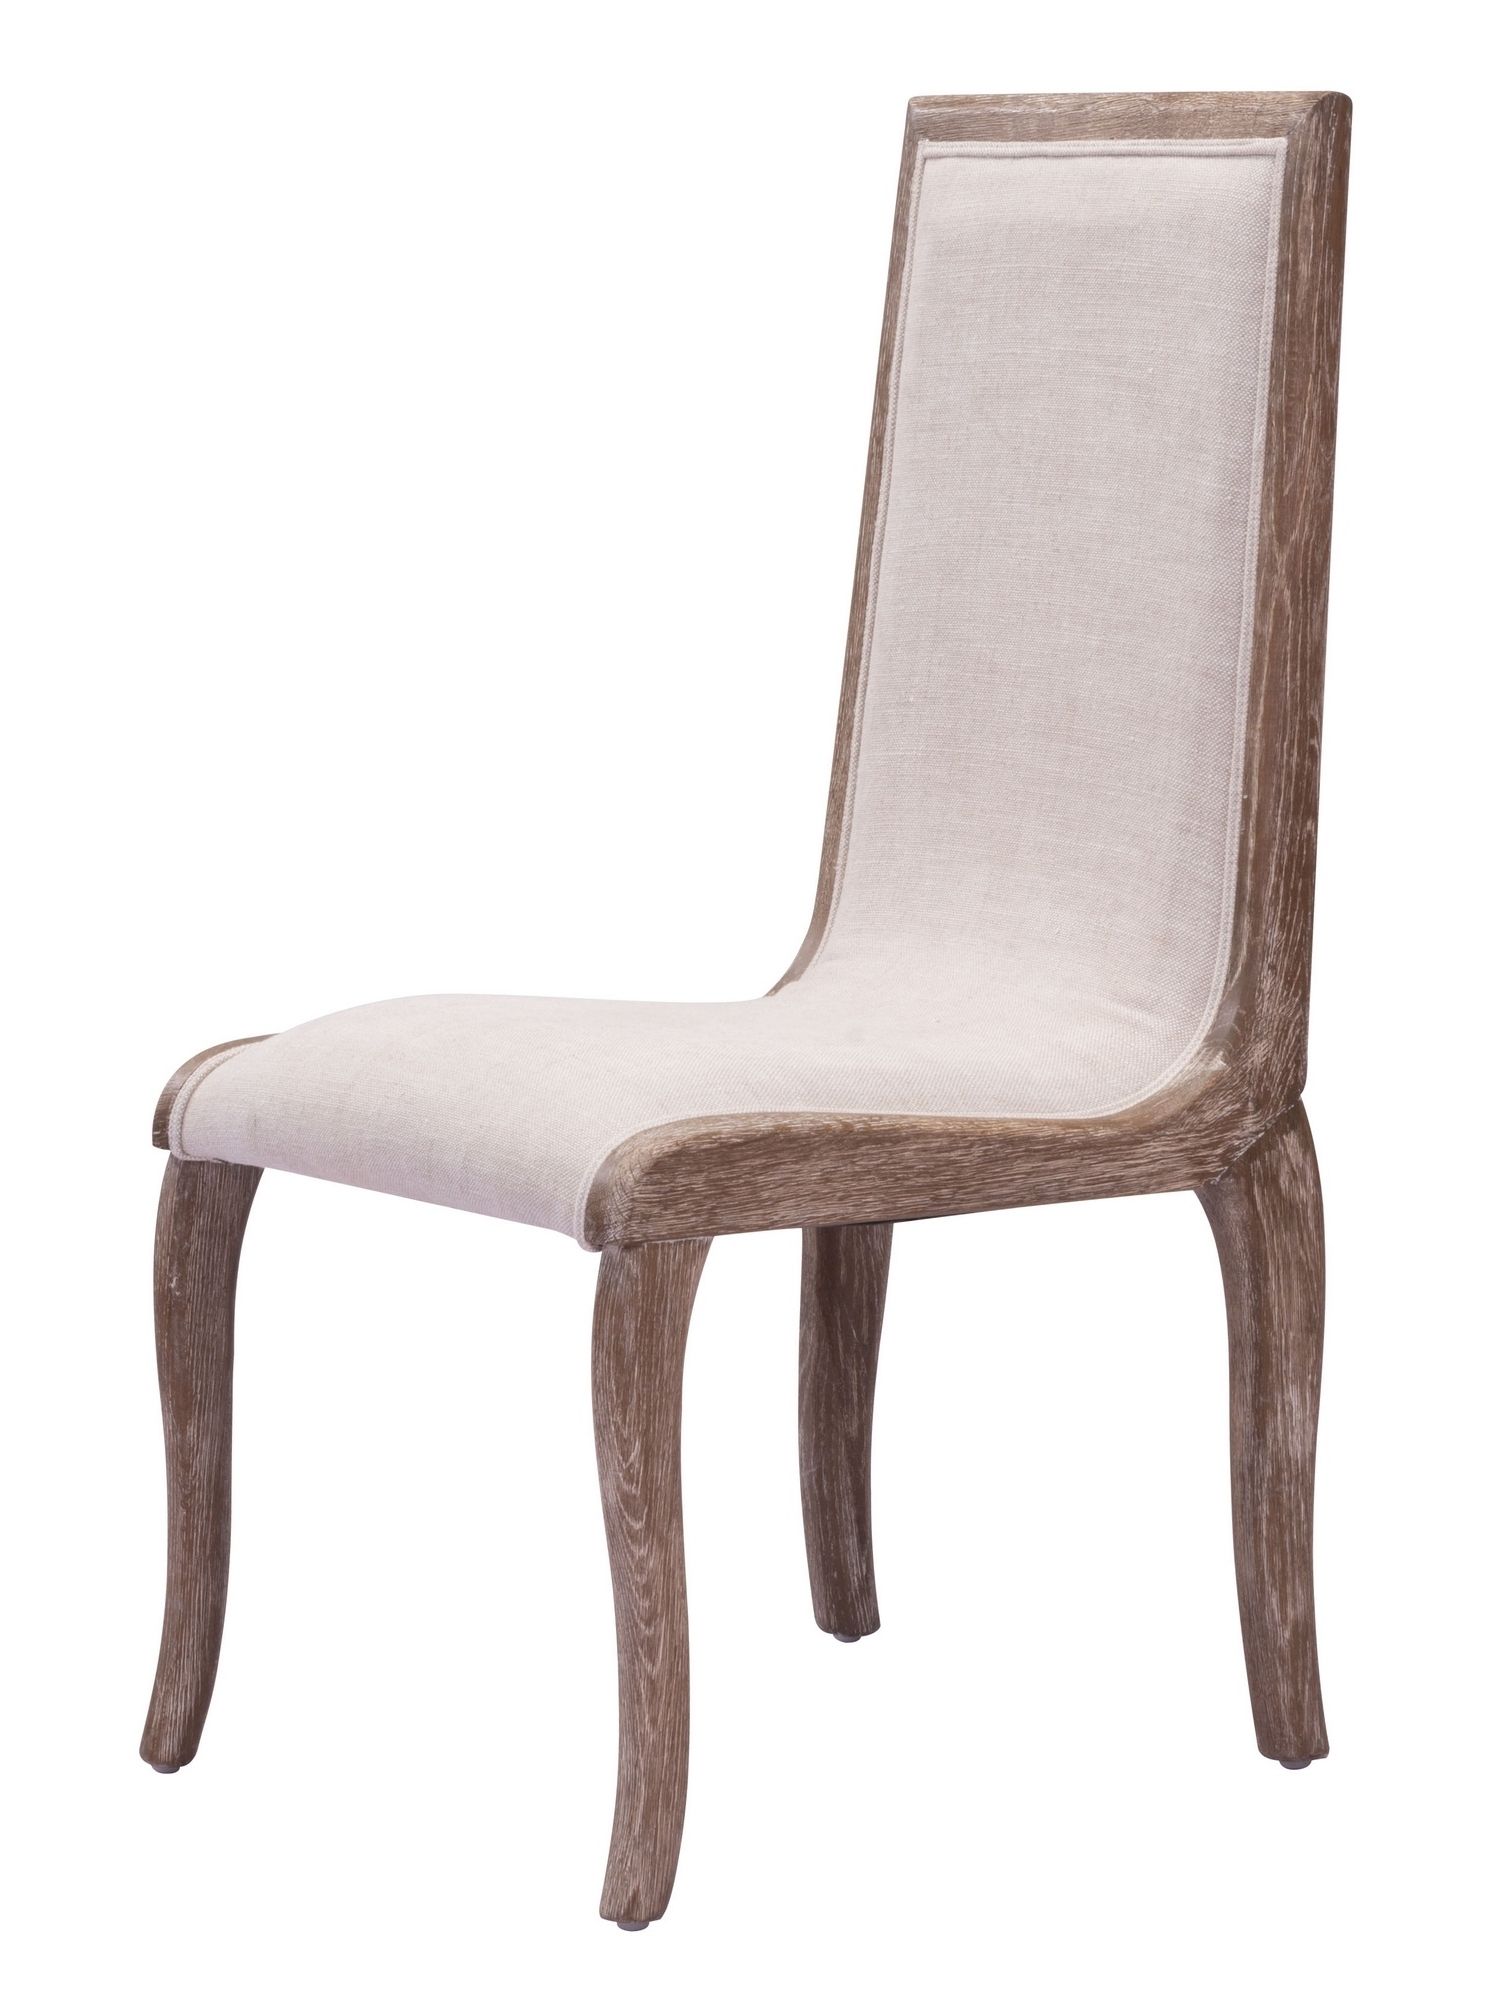 Scheler Shabby Chic Dining Chair Beige Intended For Most Recently Released Shabby Chic Dining Chairs (View 11 of 25)